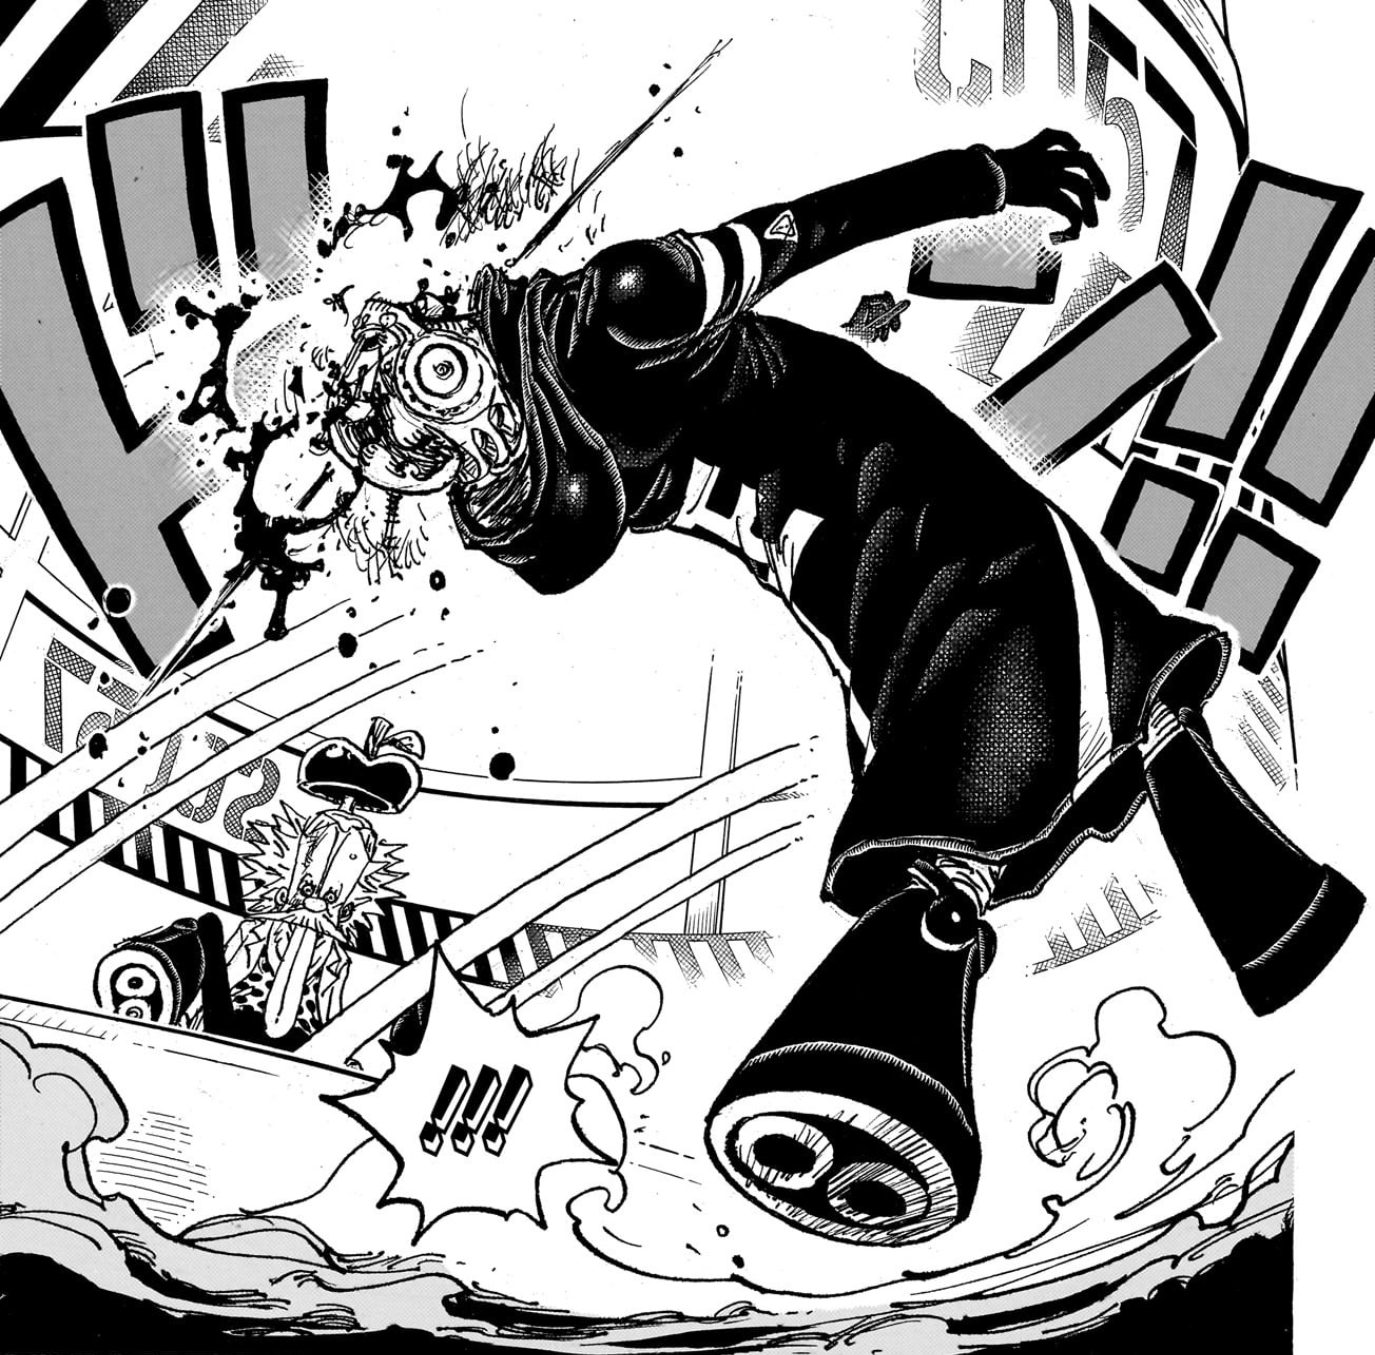 SECRET OF VEGAPUNK'S TECH REVEALED / One Piece Chapter 1065 Spoilers 